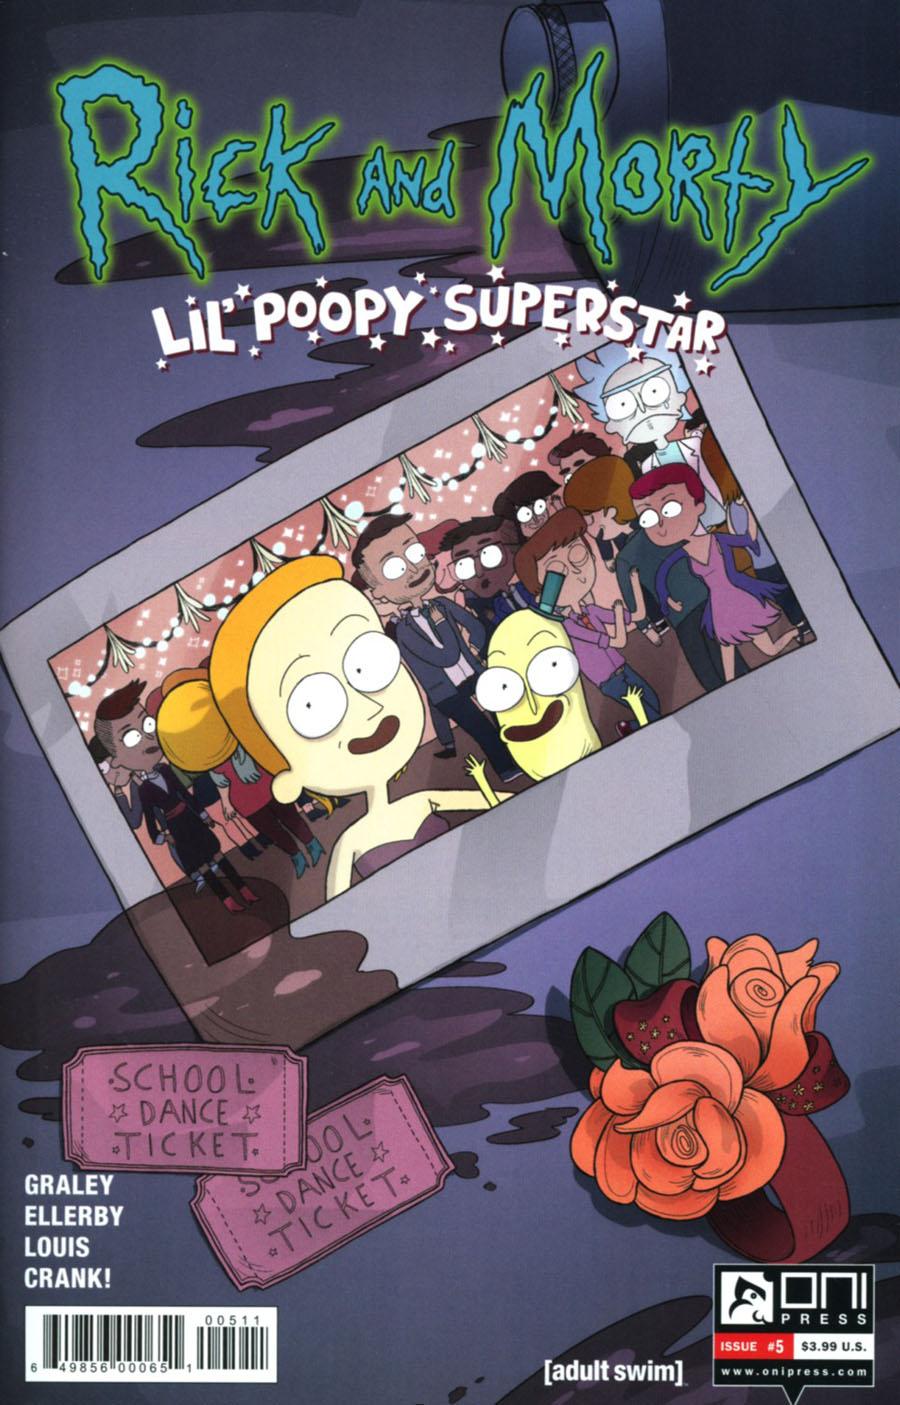 Rick And Morty Lil Poopy Superstar Vol. 1 #5